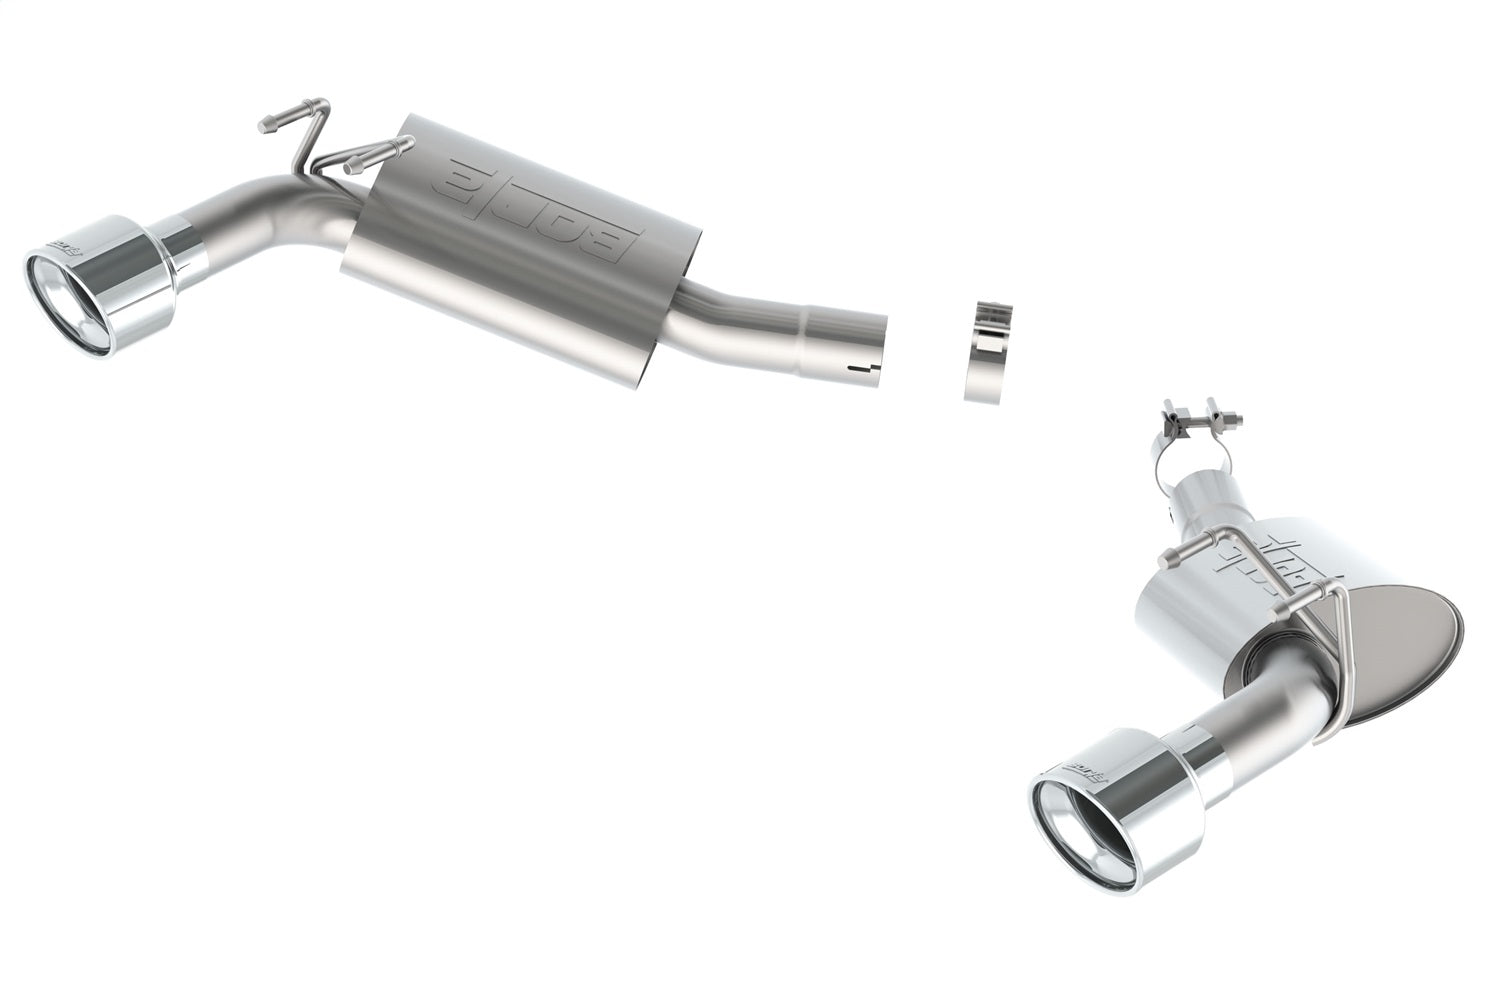 Borla 11847 Axle-Back Exhaust System - Touring